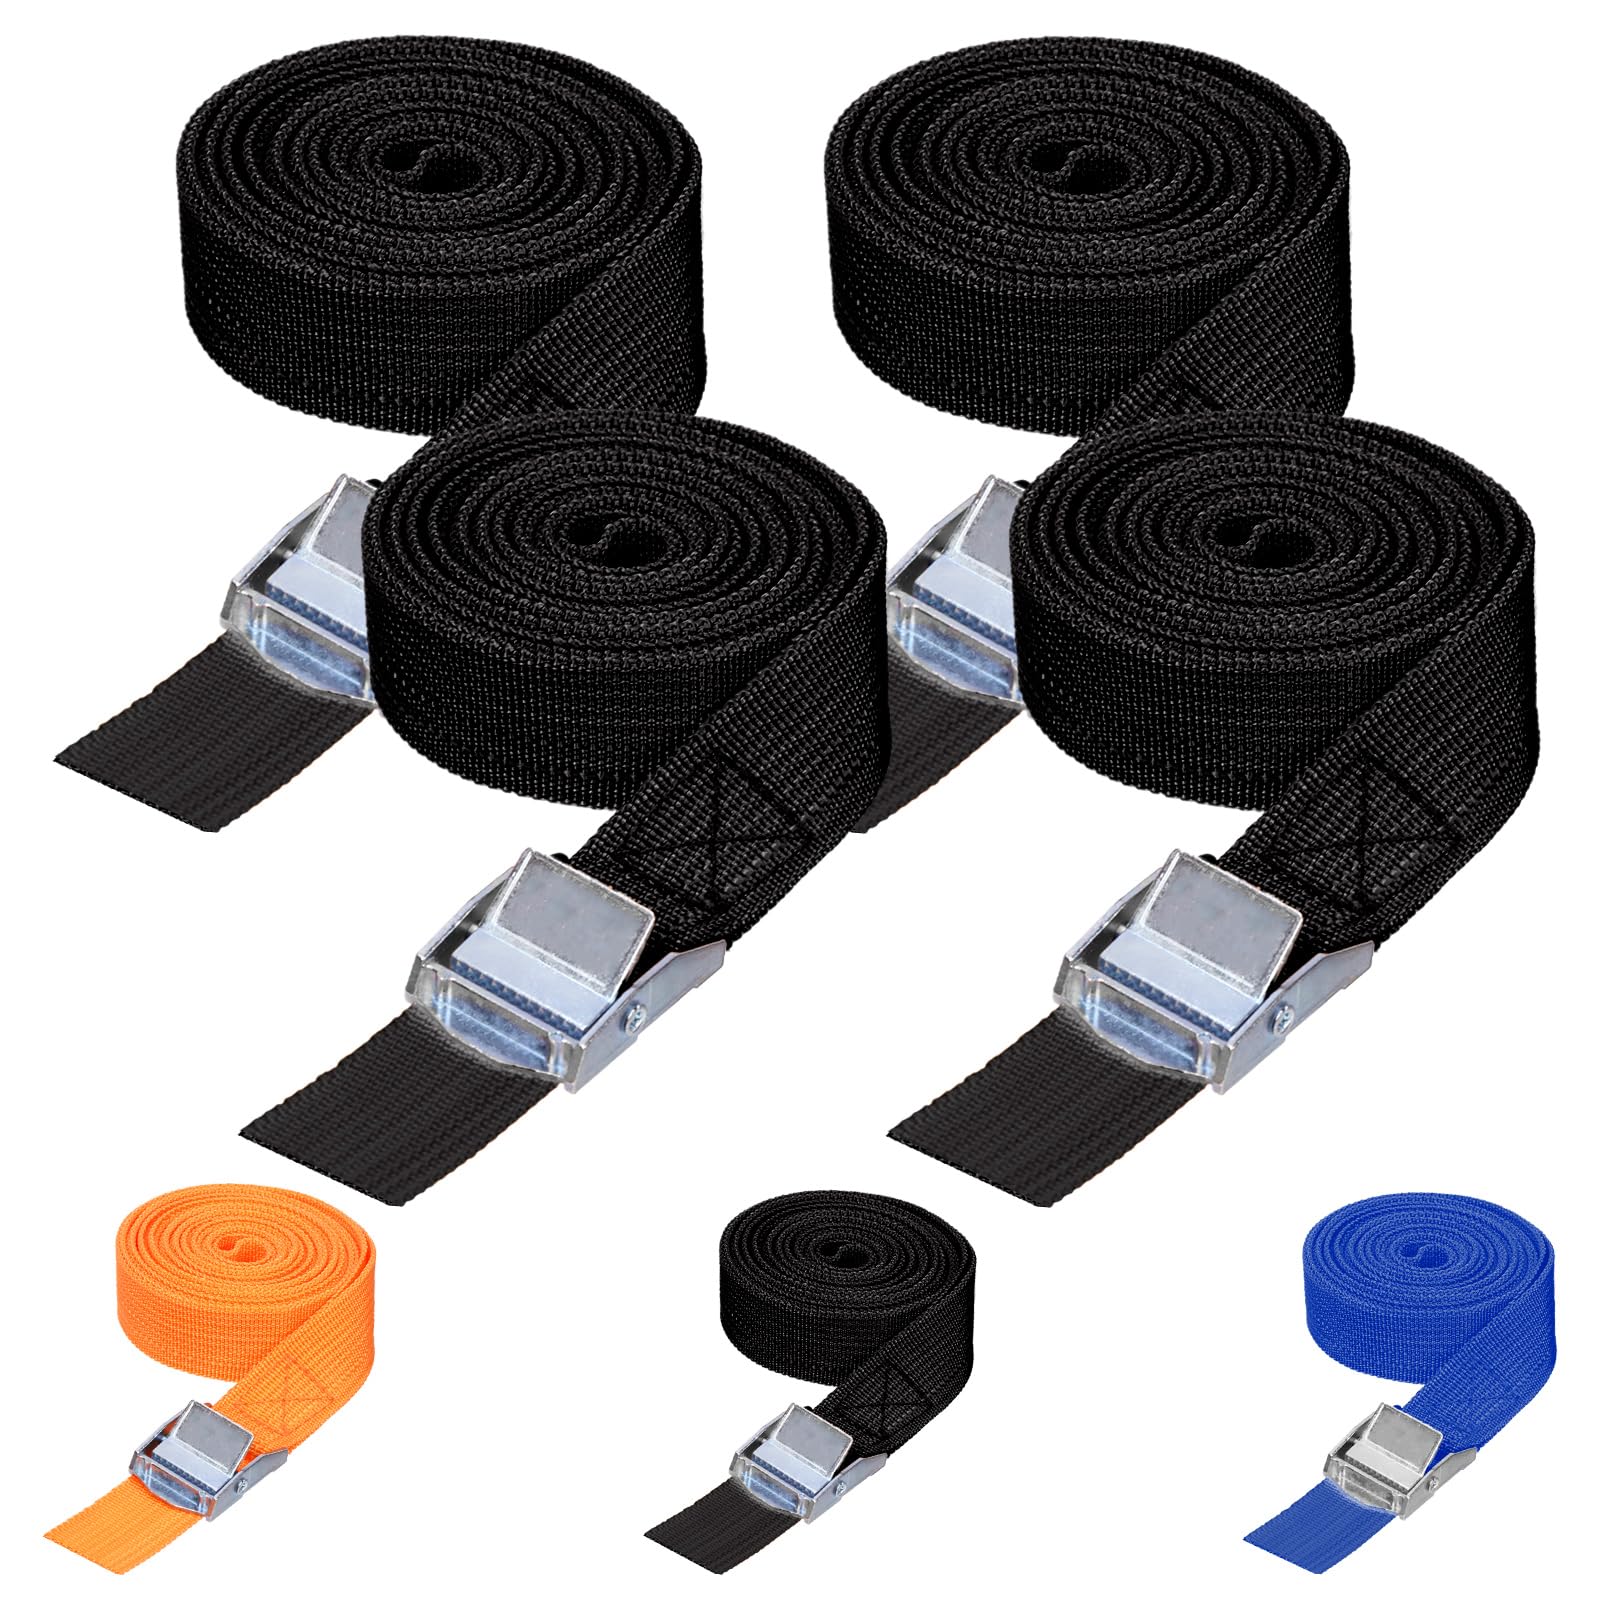 Tanstic 4Pcs Lashing Straps, 1 inch x 10 ft Tie Down Straps with Buckles, Adjustable Cam Buckle Straps Heavy Duty Secure Straps up to 600lbs (Black) von Tanstic